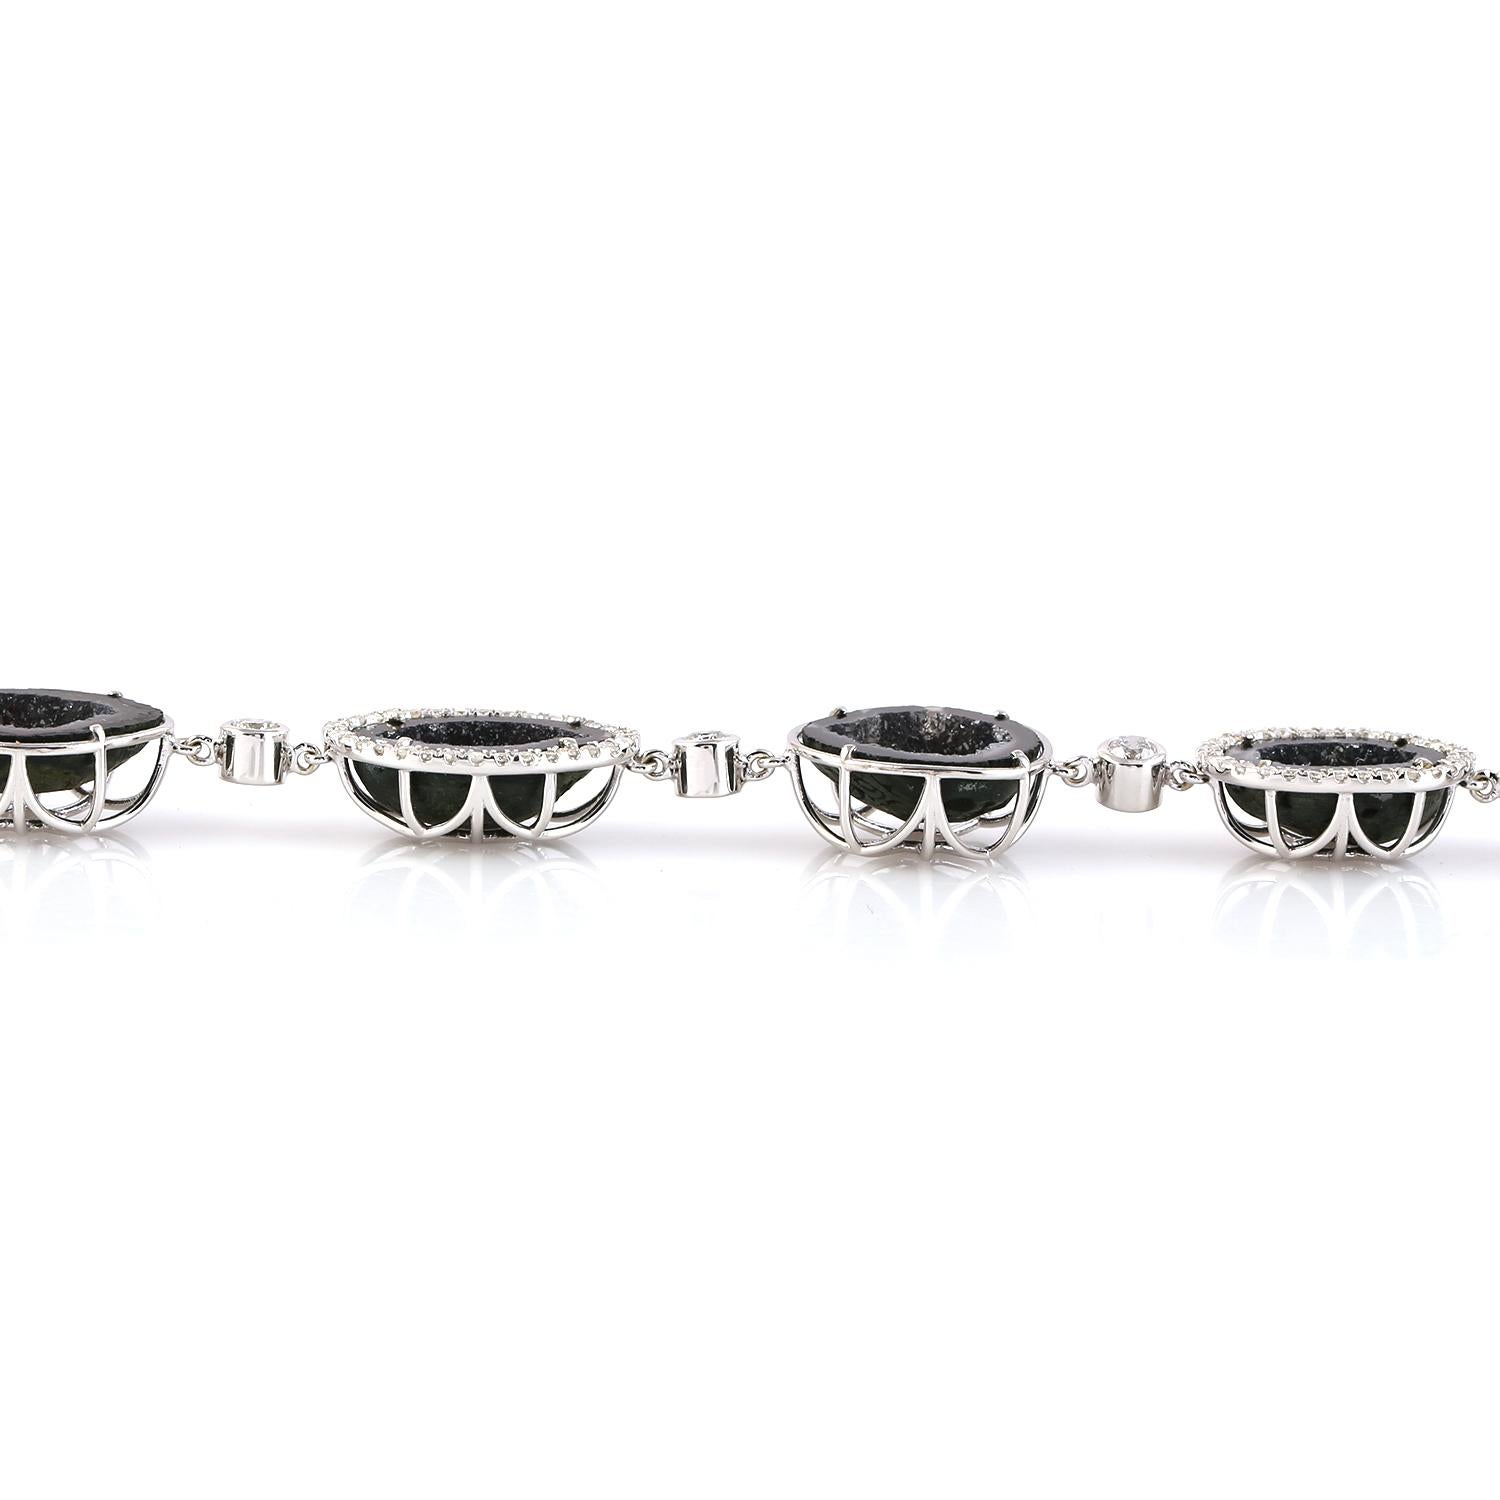 Uneven Sliced Geode Bracelet with Pave Diamonds Made in 14k White Gold In New Condition For Sale In New York, NY